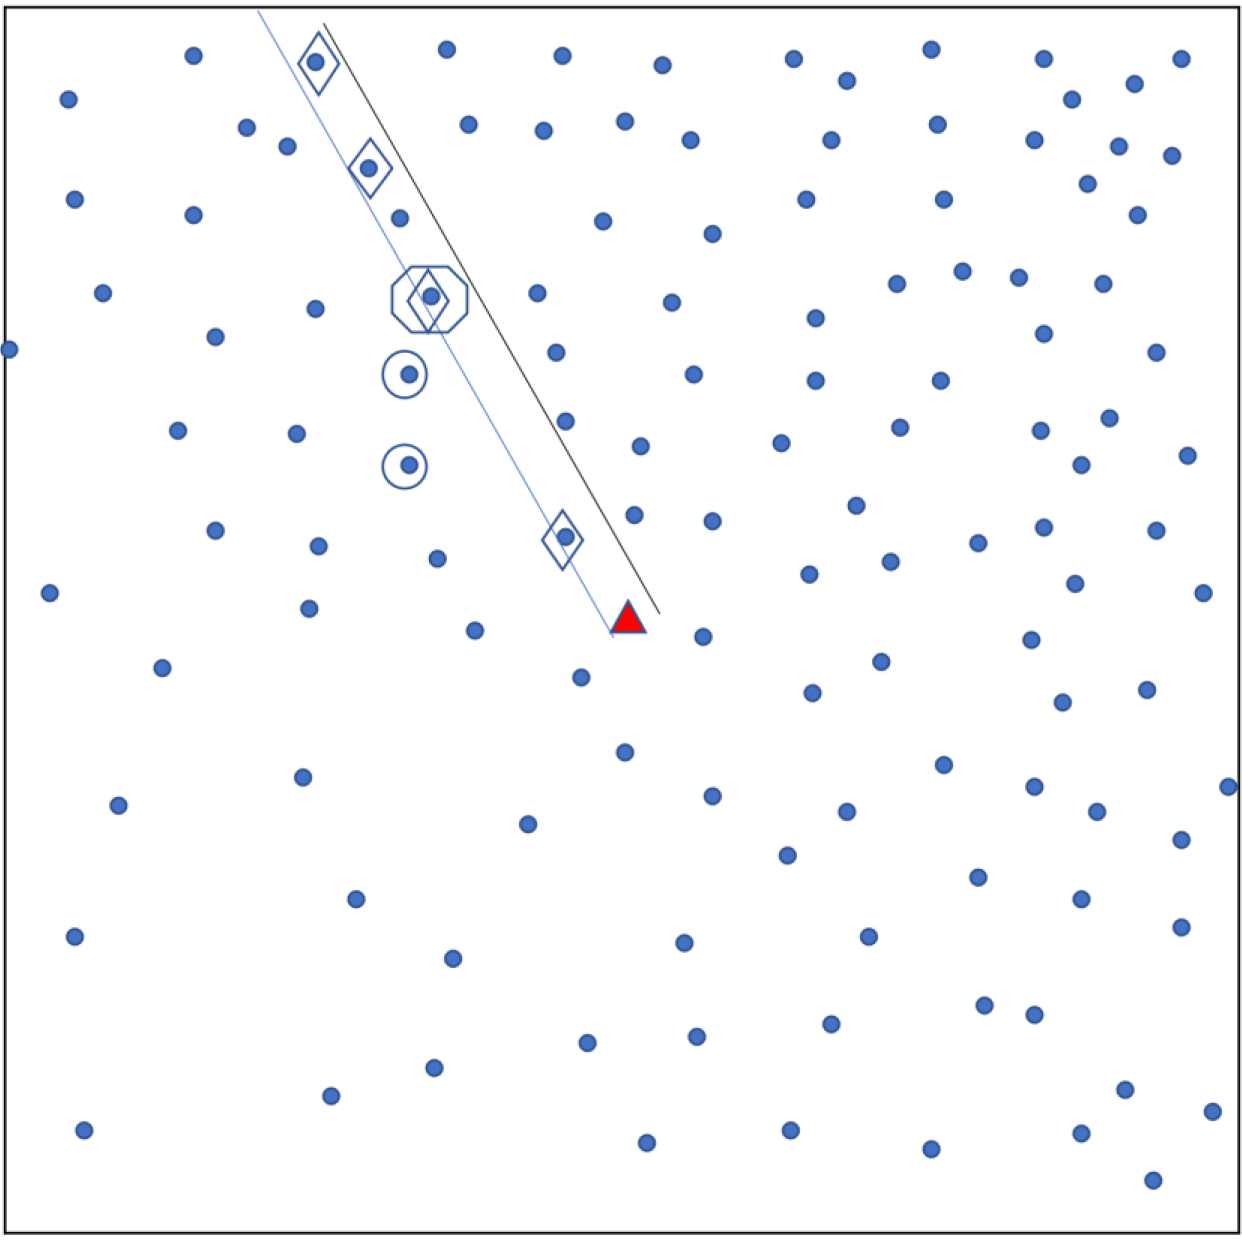 Sampling using original EPI method. Each dot shows a household. A central landmark is identified (triangle). A random direction is chosen (parallel lines) from the landmark and households in that direction are identified (diamonds). From these, the ‘starting’ household’ is randomly chosen (octagon) and nearest neighbours (in Euclidean distance) are also selected for the sample (circles). The ‘Quad’ sampling method divides a town into four quadrants and applies this sampling approach in each quadrant.